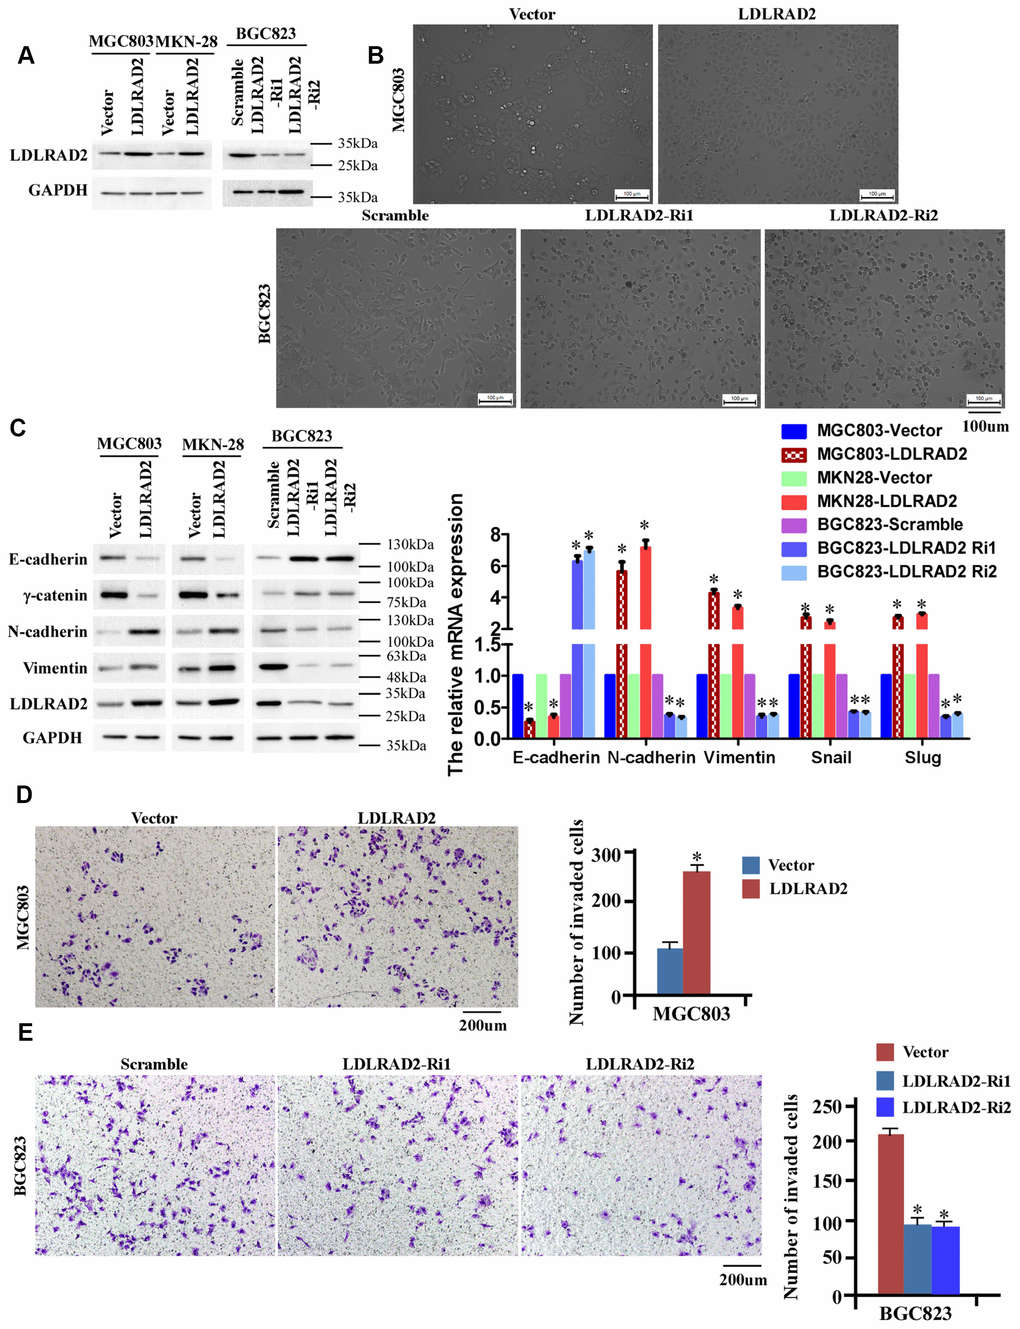 LDLRAD2 promotes in vitro migration and invasion of GC cells. Overexpression of LDLRAD2 in MGC-803 and MKN28 cell lines and silenced LDLRAD2 in BGC823 cell line (A). Overexpression of LDLRAD2 significantly enhanced morphological characteristics of EMT of MGC-803 cell line, while silence of LDLRAD2 significantly inhibited morphological characteristics of EMT of BGC823 cell line (B). Western blotting analysis showed that the expression levels of epithelial cell markers such as E-cadherin and γ-catenin were dramatically decreased, while mesenchymal cell markers such as N-cadherin and vimentin were significantly increased in LDLRAD2-overexpression cell lines (C). The expression levels of epithelial cell markers were increased, while mesenchymal cell markers were decreased in LDLRAD2-silenced cell line, (C). LDLRAD2-overexpression MGC-803 cell exhibited significantly enhanced invasive capability (D), while LDLRAD2-silenced BGC-823 cell had dramatically decreased invasive capability (E).